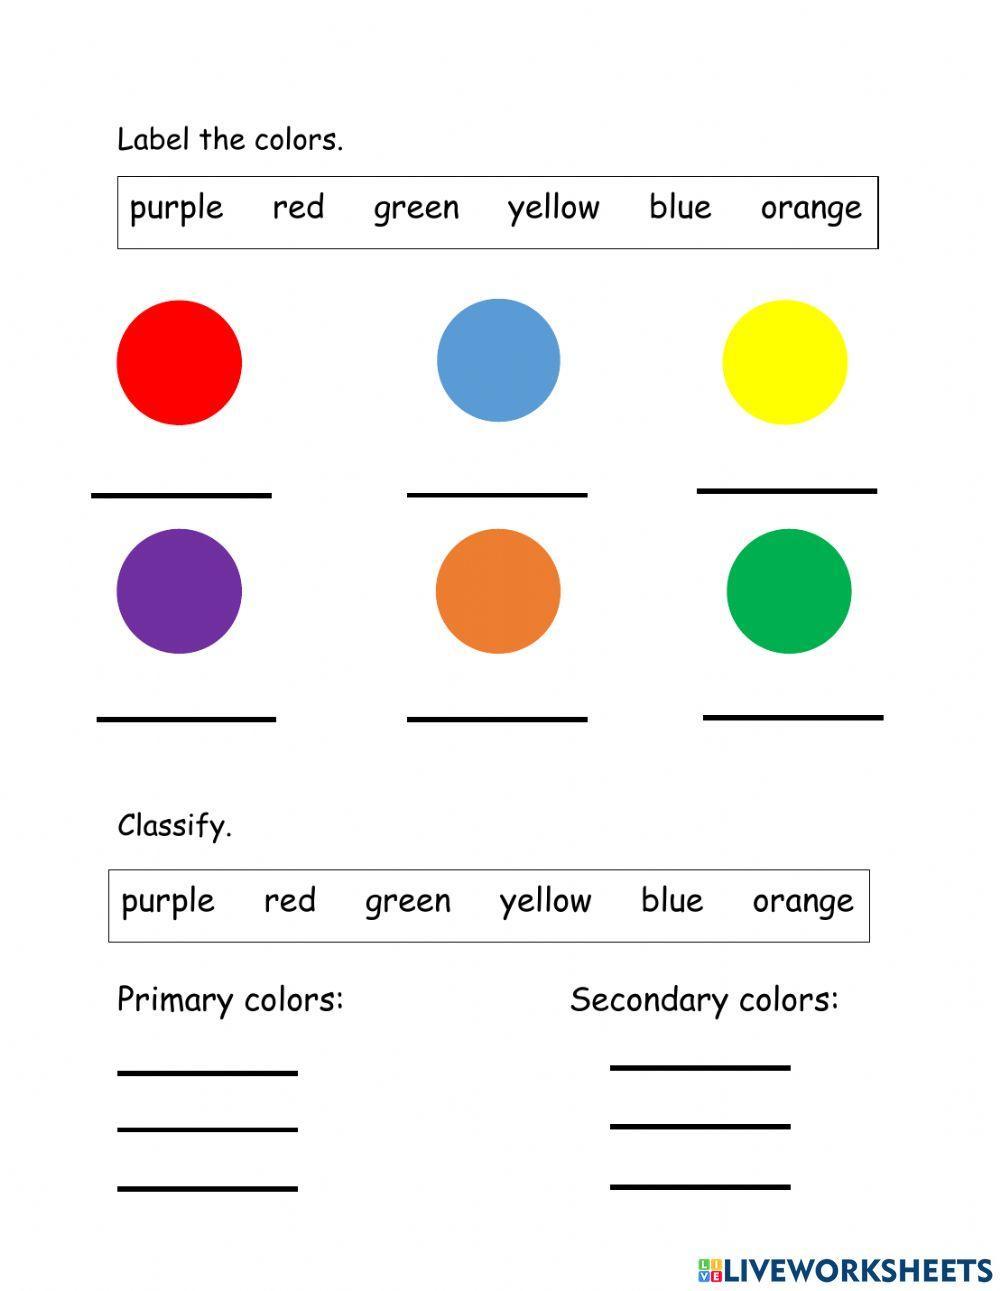 Primary and Secondary colors